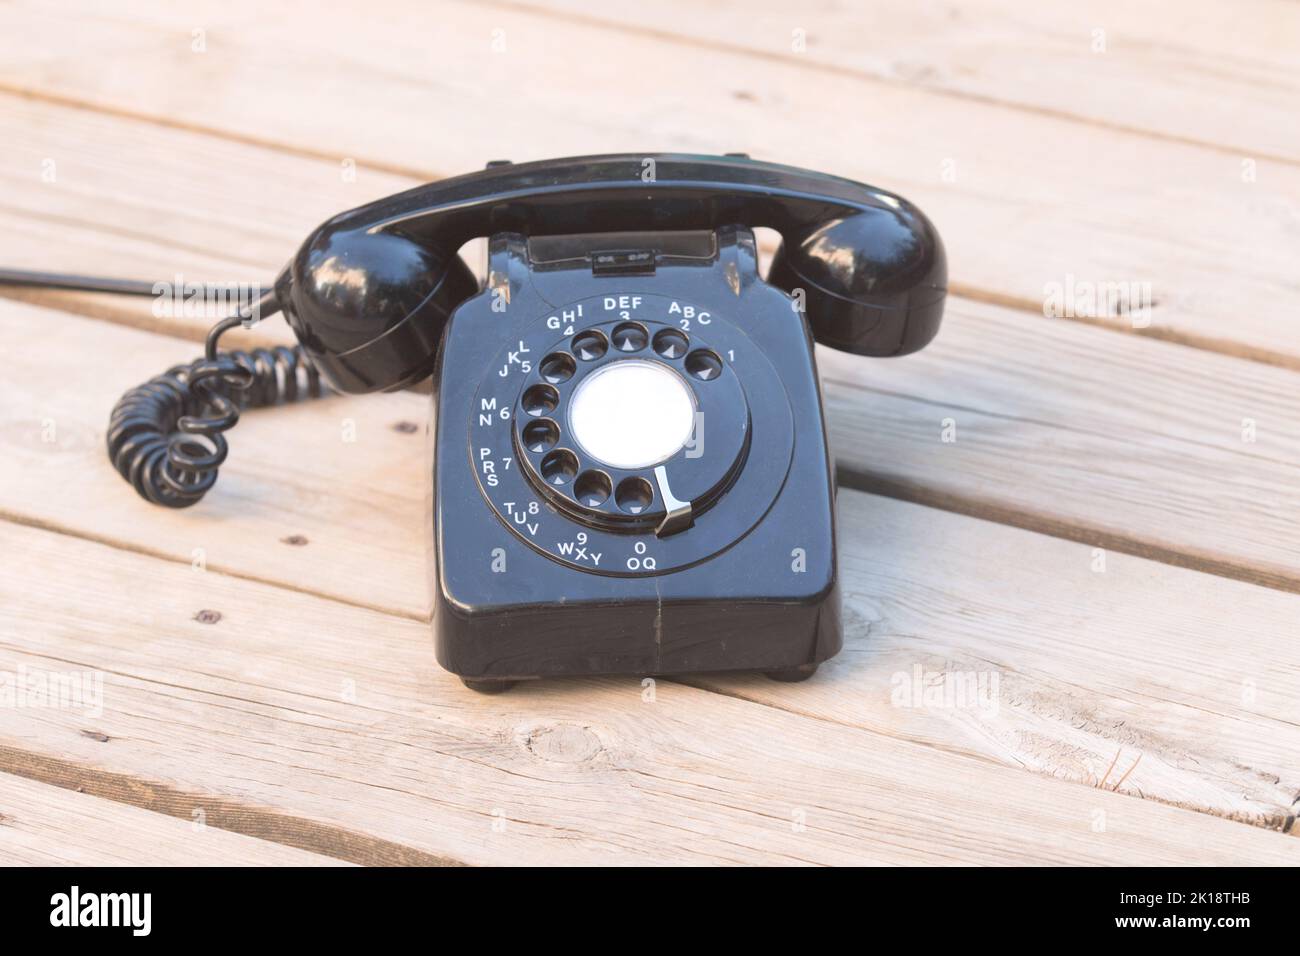 Old fashioned rotary dial telephone on wooden floorboards Stock Photo